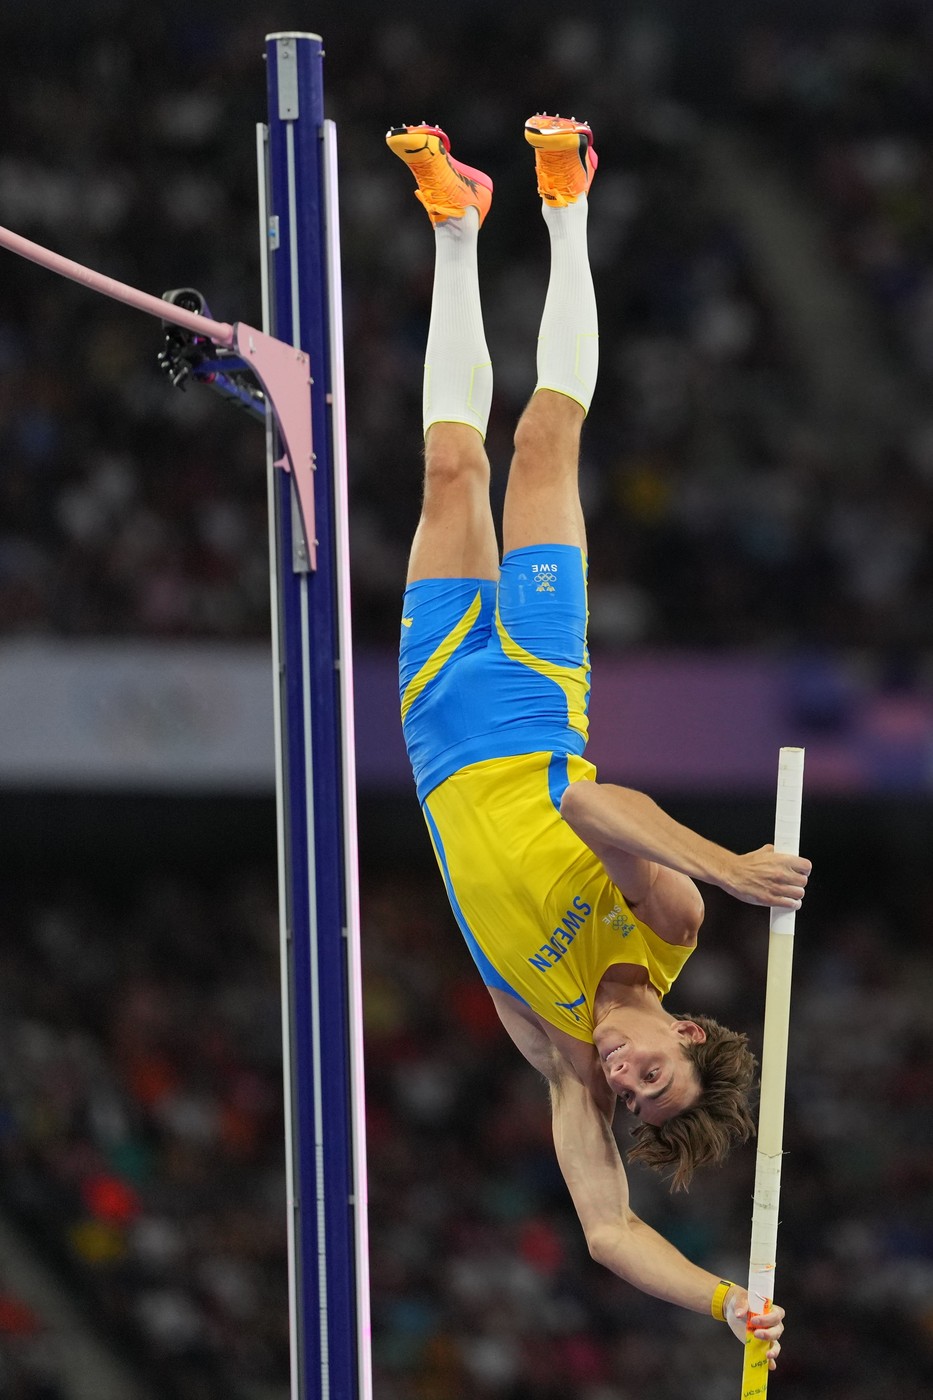 Armand Duplantis of Sweden wins gold and sets a new World Record in the Men's Pole Vault
Paris 2024 Olympic Games, Day Ten, Paris, France - 05 Aug 2024,Image: 896314468, License: Rights-managed, Restrictions: , Model Release: no